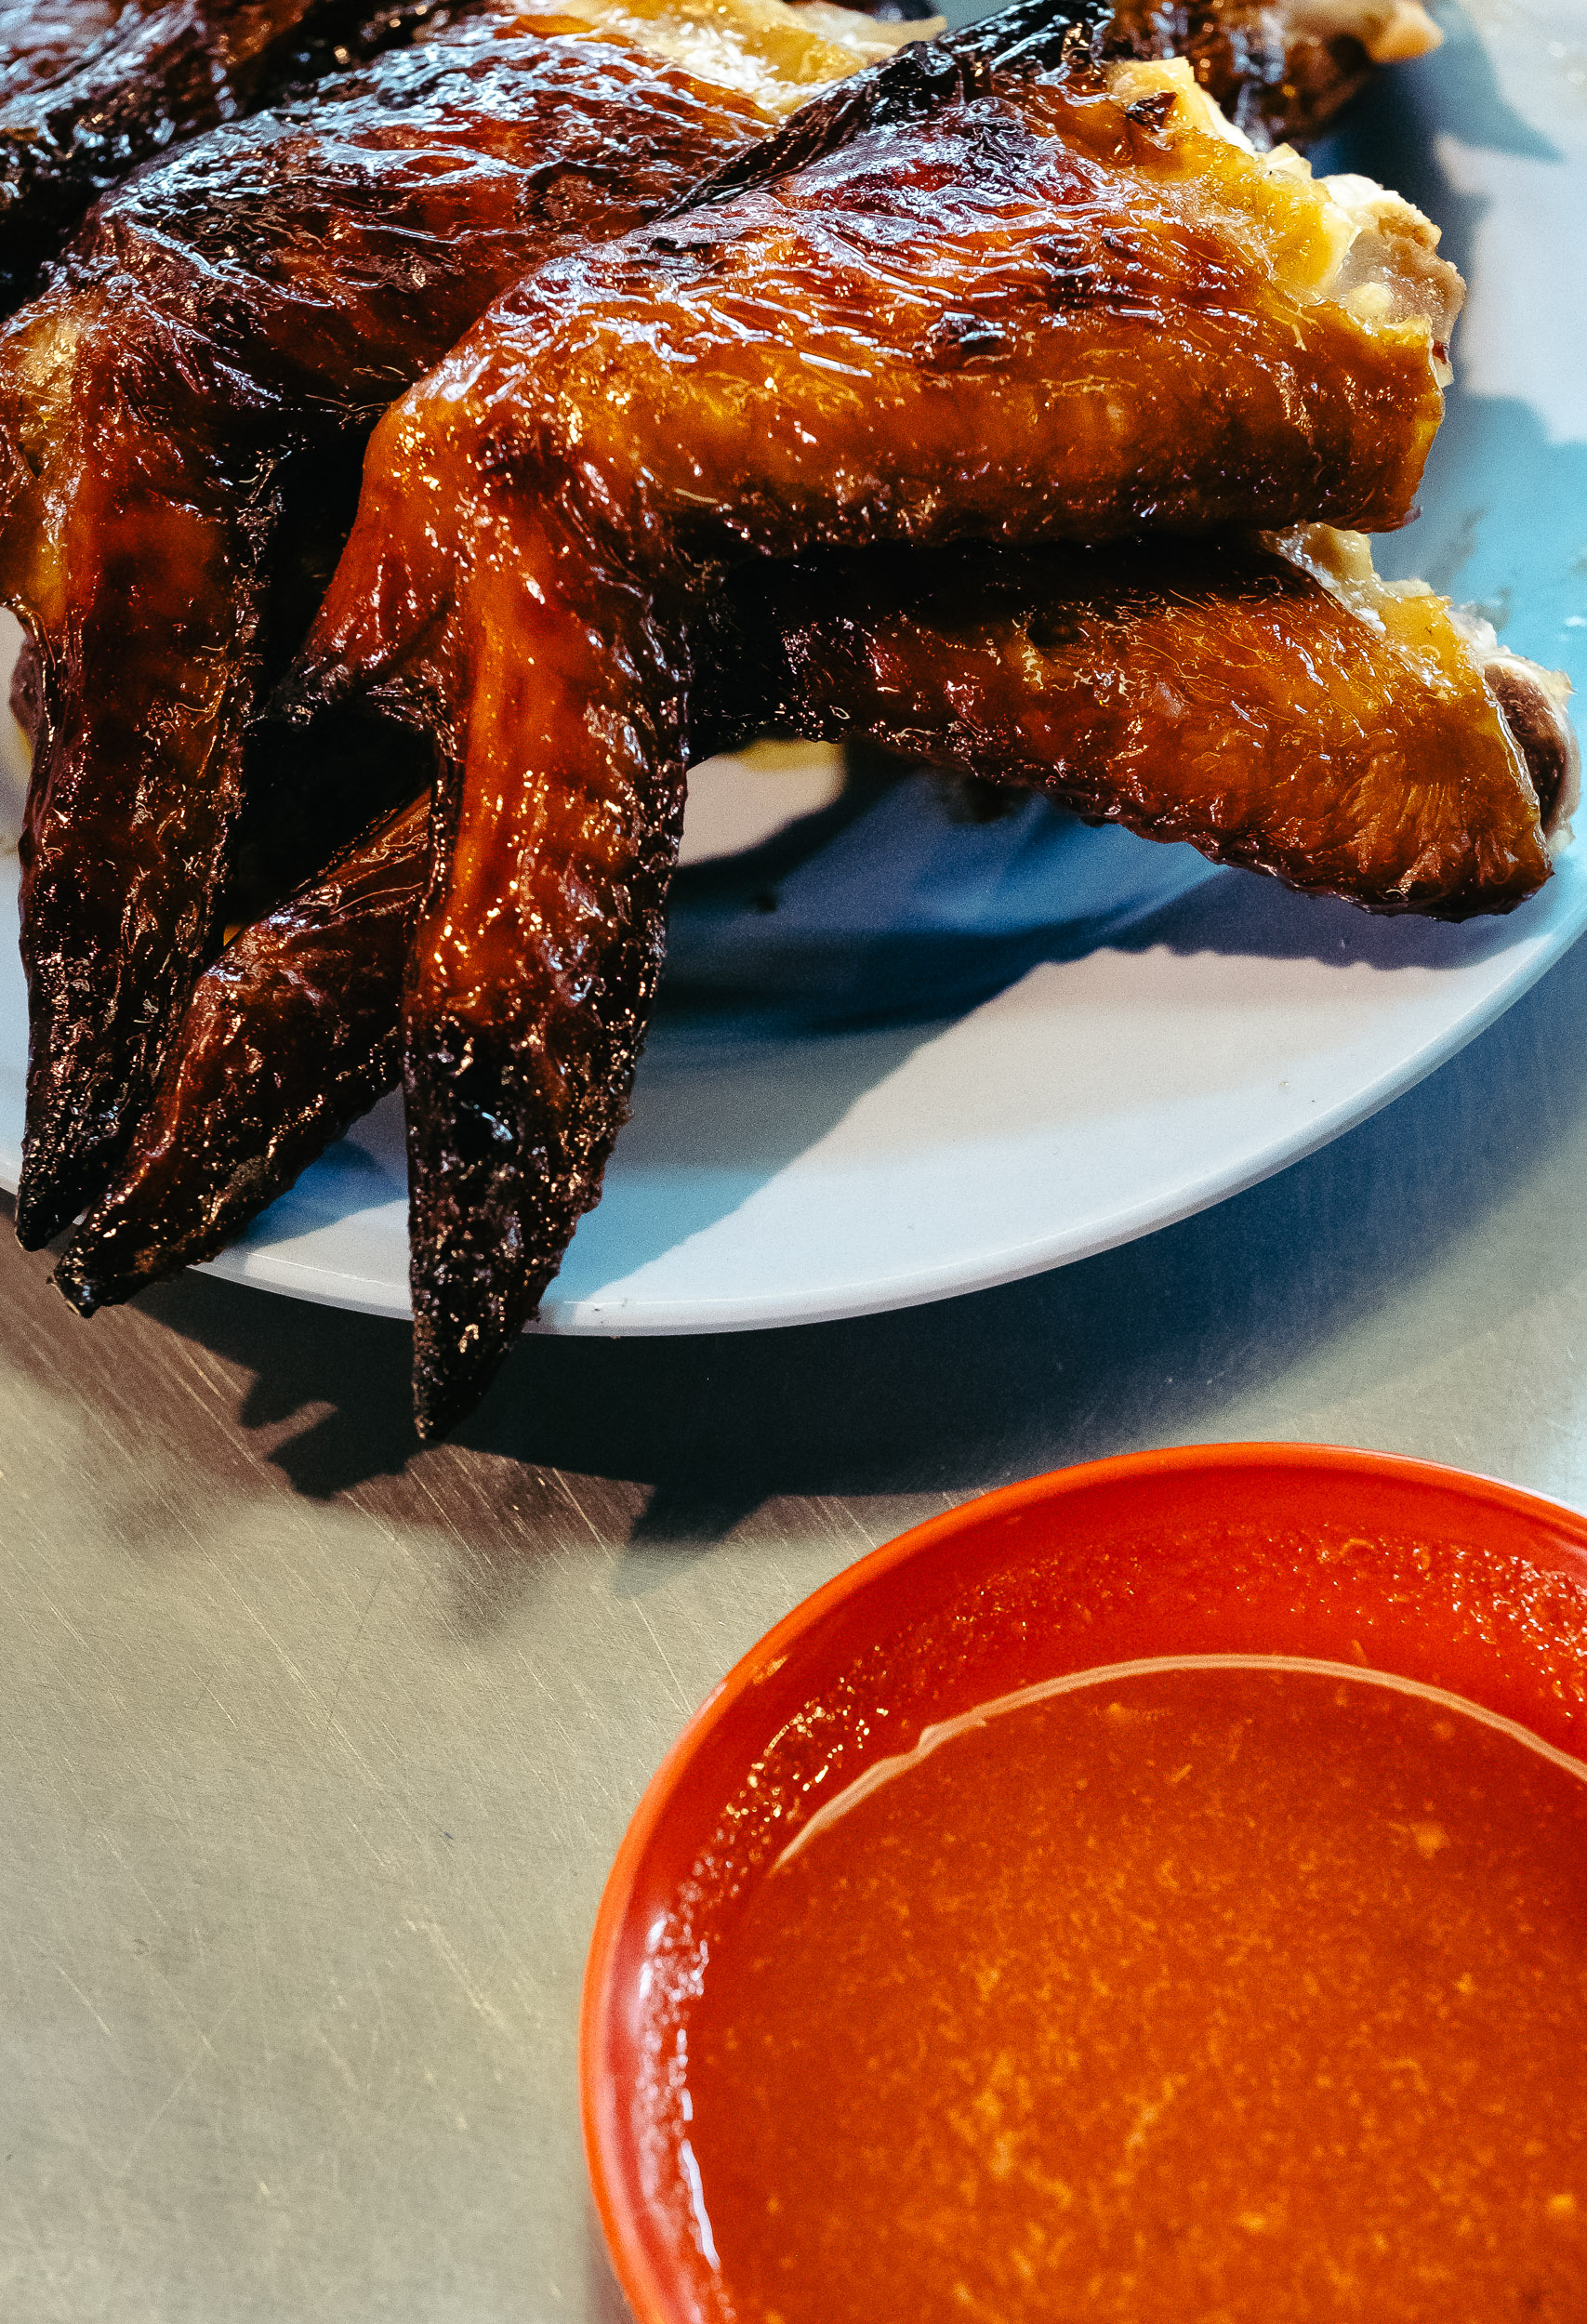  Famous Fried chicken wings with chilli dip in Jalan Alor in Kuala lumpur - Malaysia  Fujifilm X-T2 + Fujinon XF 80mm f/2.8 R LM WR OIS Macro  1/30sec, f/4.5, ISO 3200 